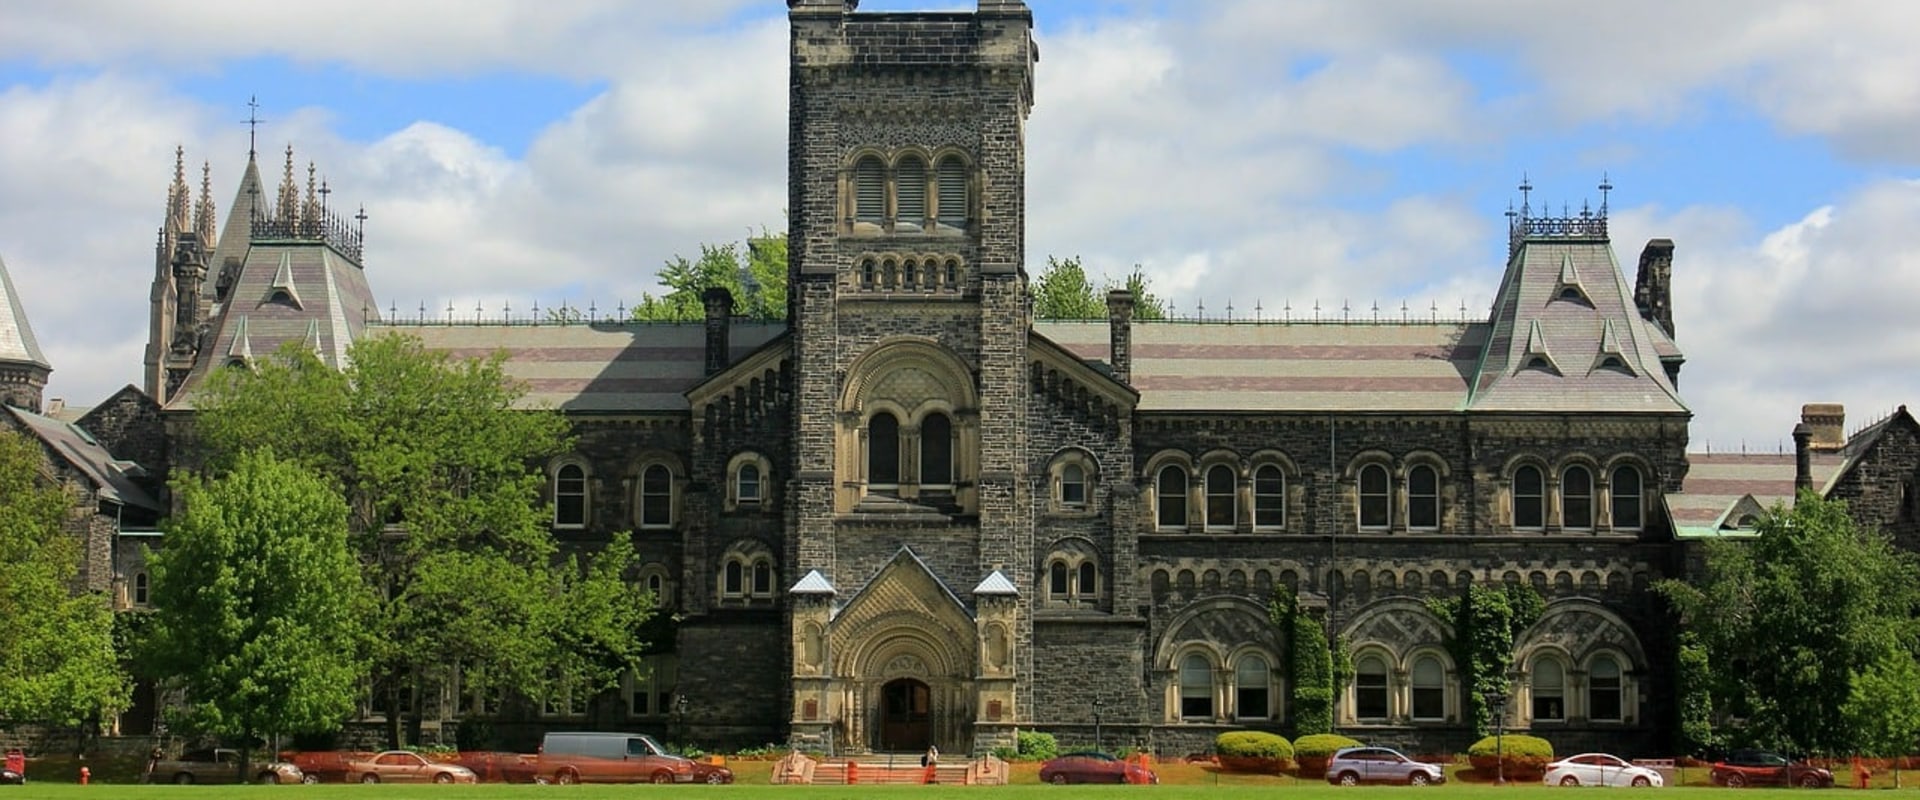 Available Degree Programs at Top Universities in Canada